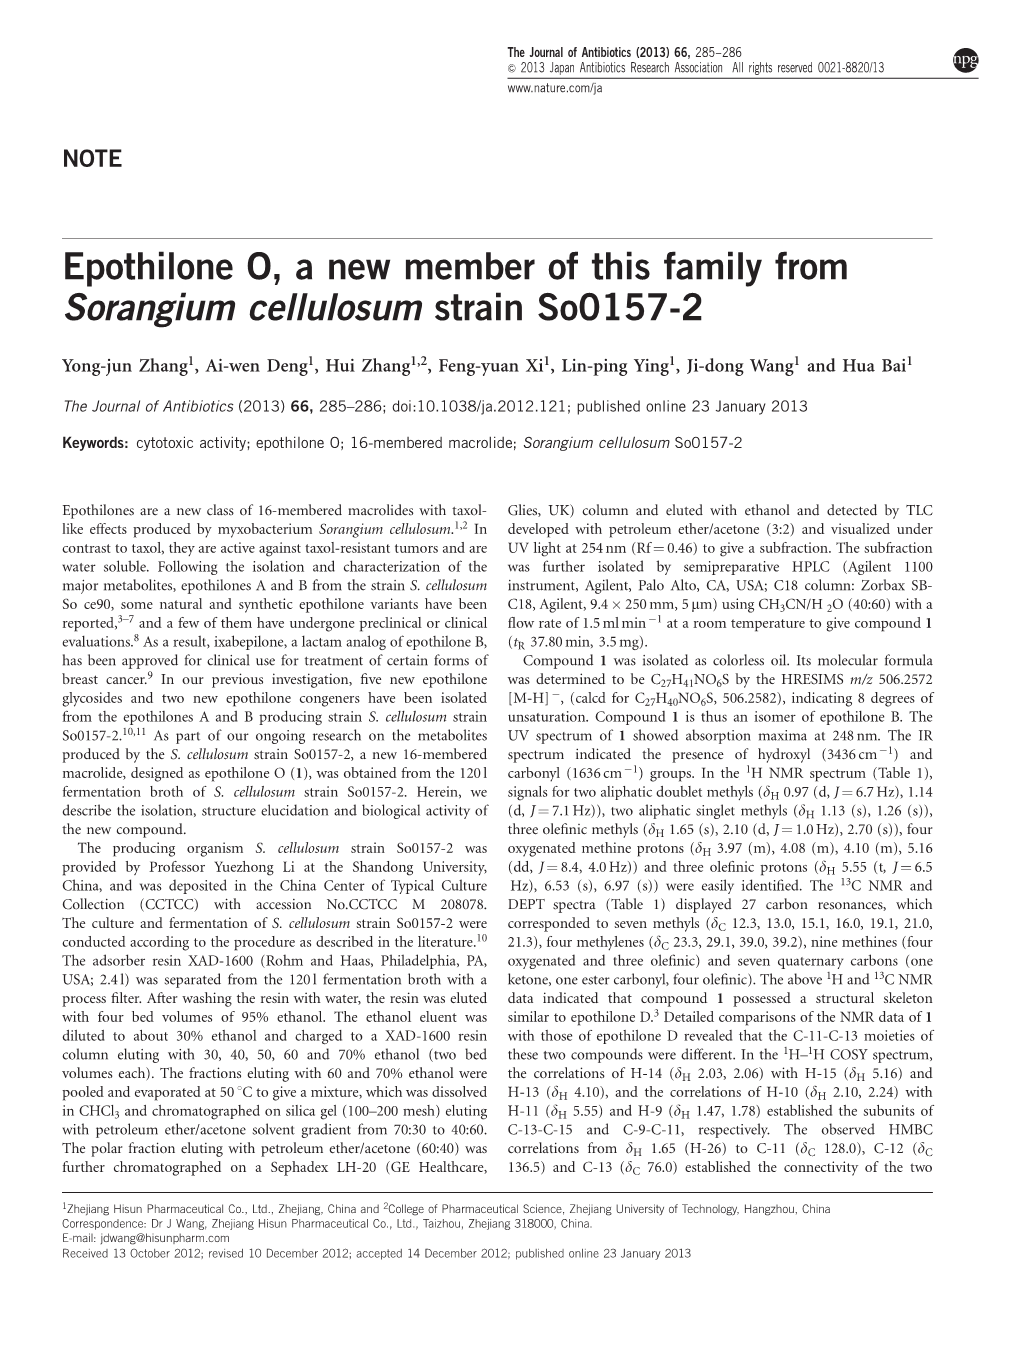 Epothilone O, a New Member of This Family from Sorangium Cellulosum Strain So0157-2